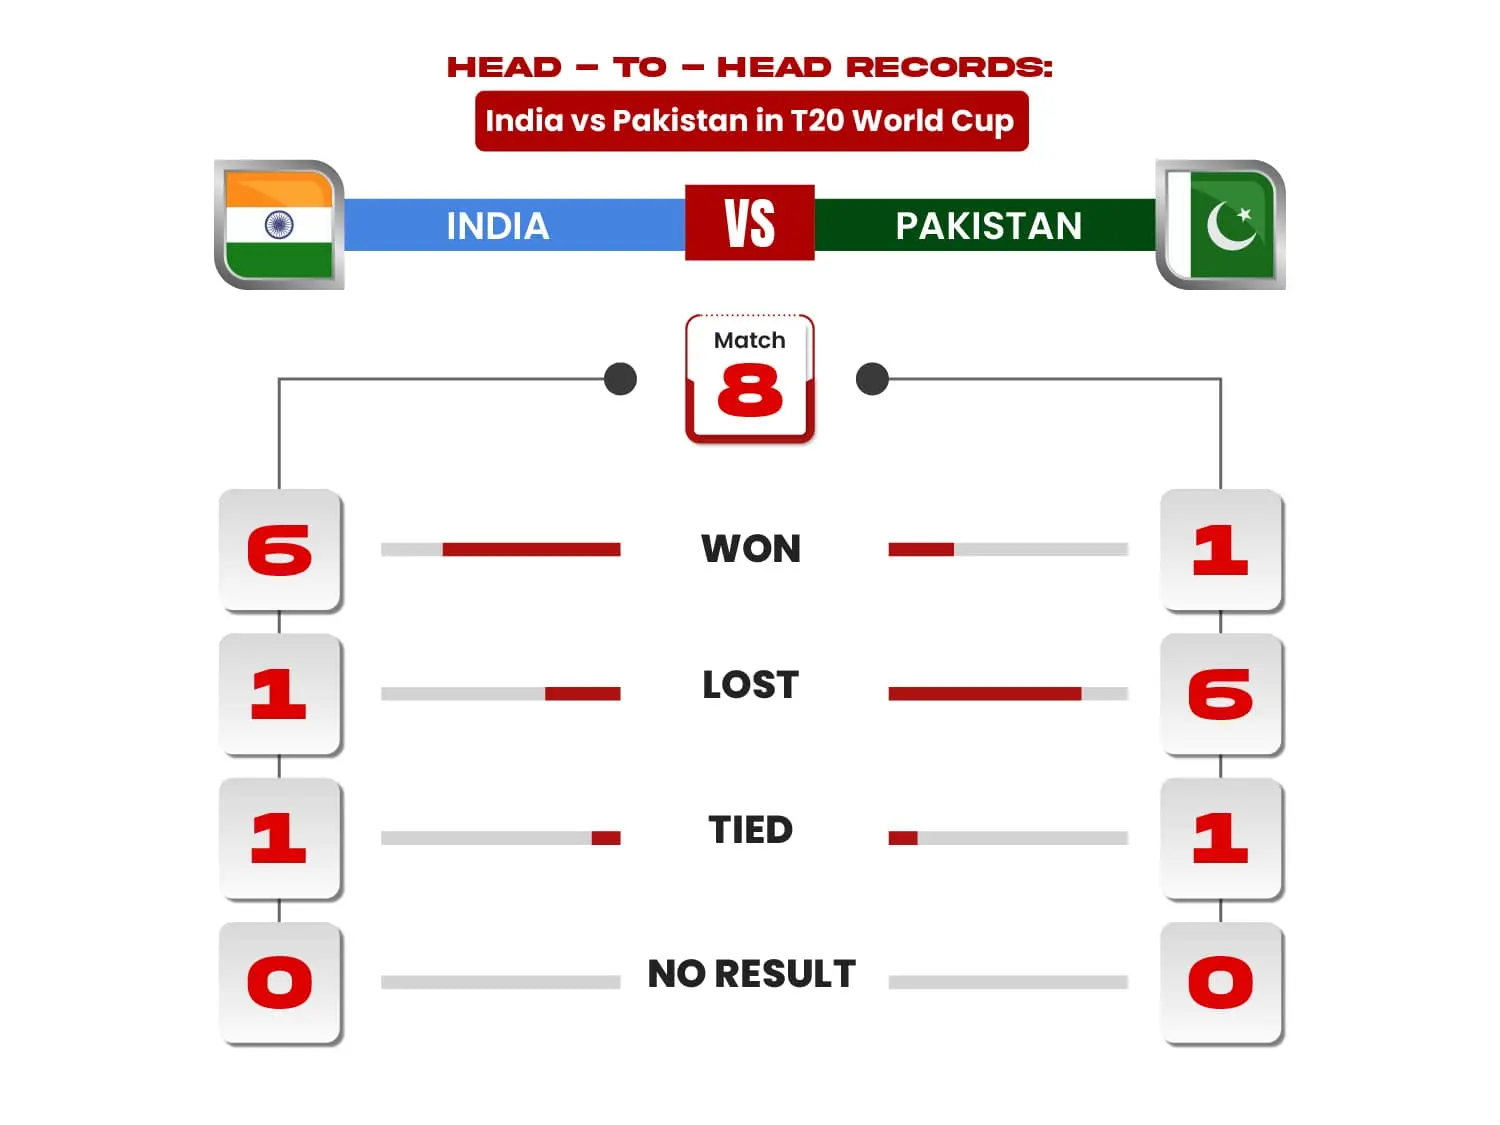 Head-to-head records: India vs Pakistan in T20 World Cup